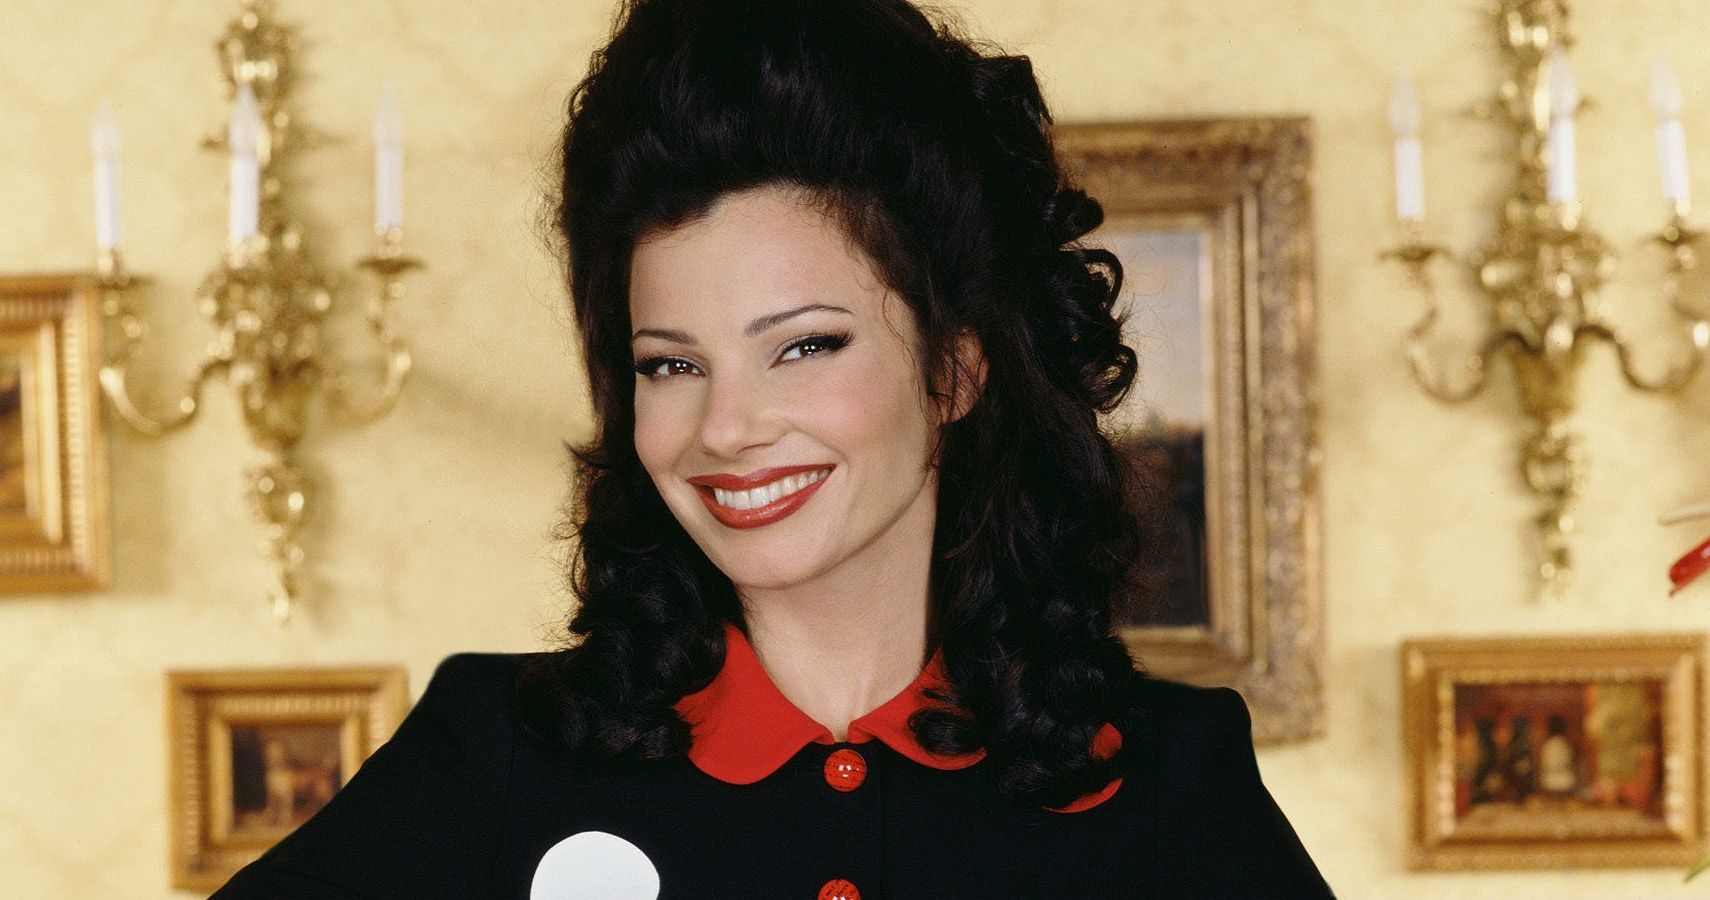 The Nanny Frans 5 Best Outfits (& 5 Worst)